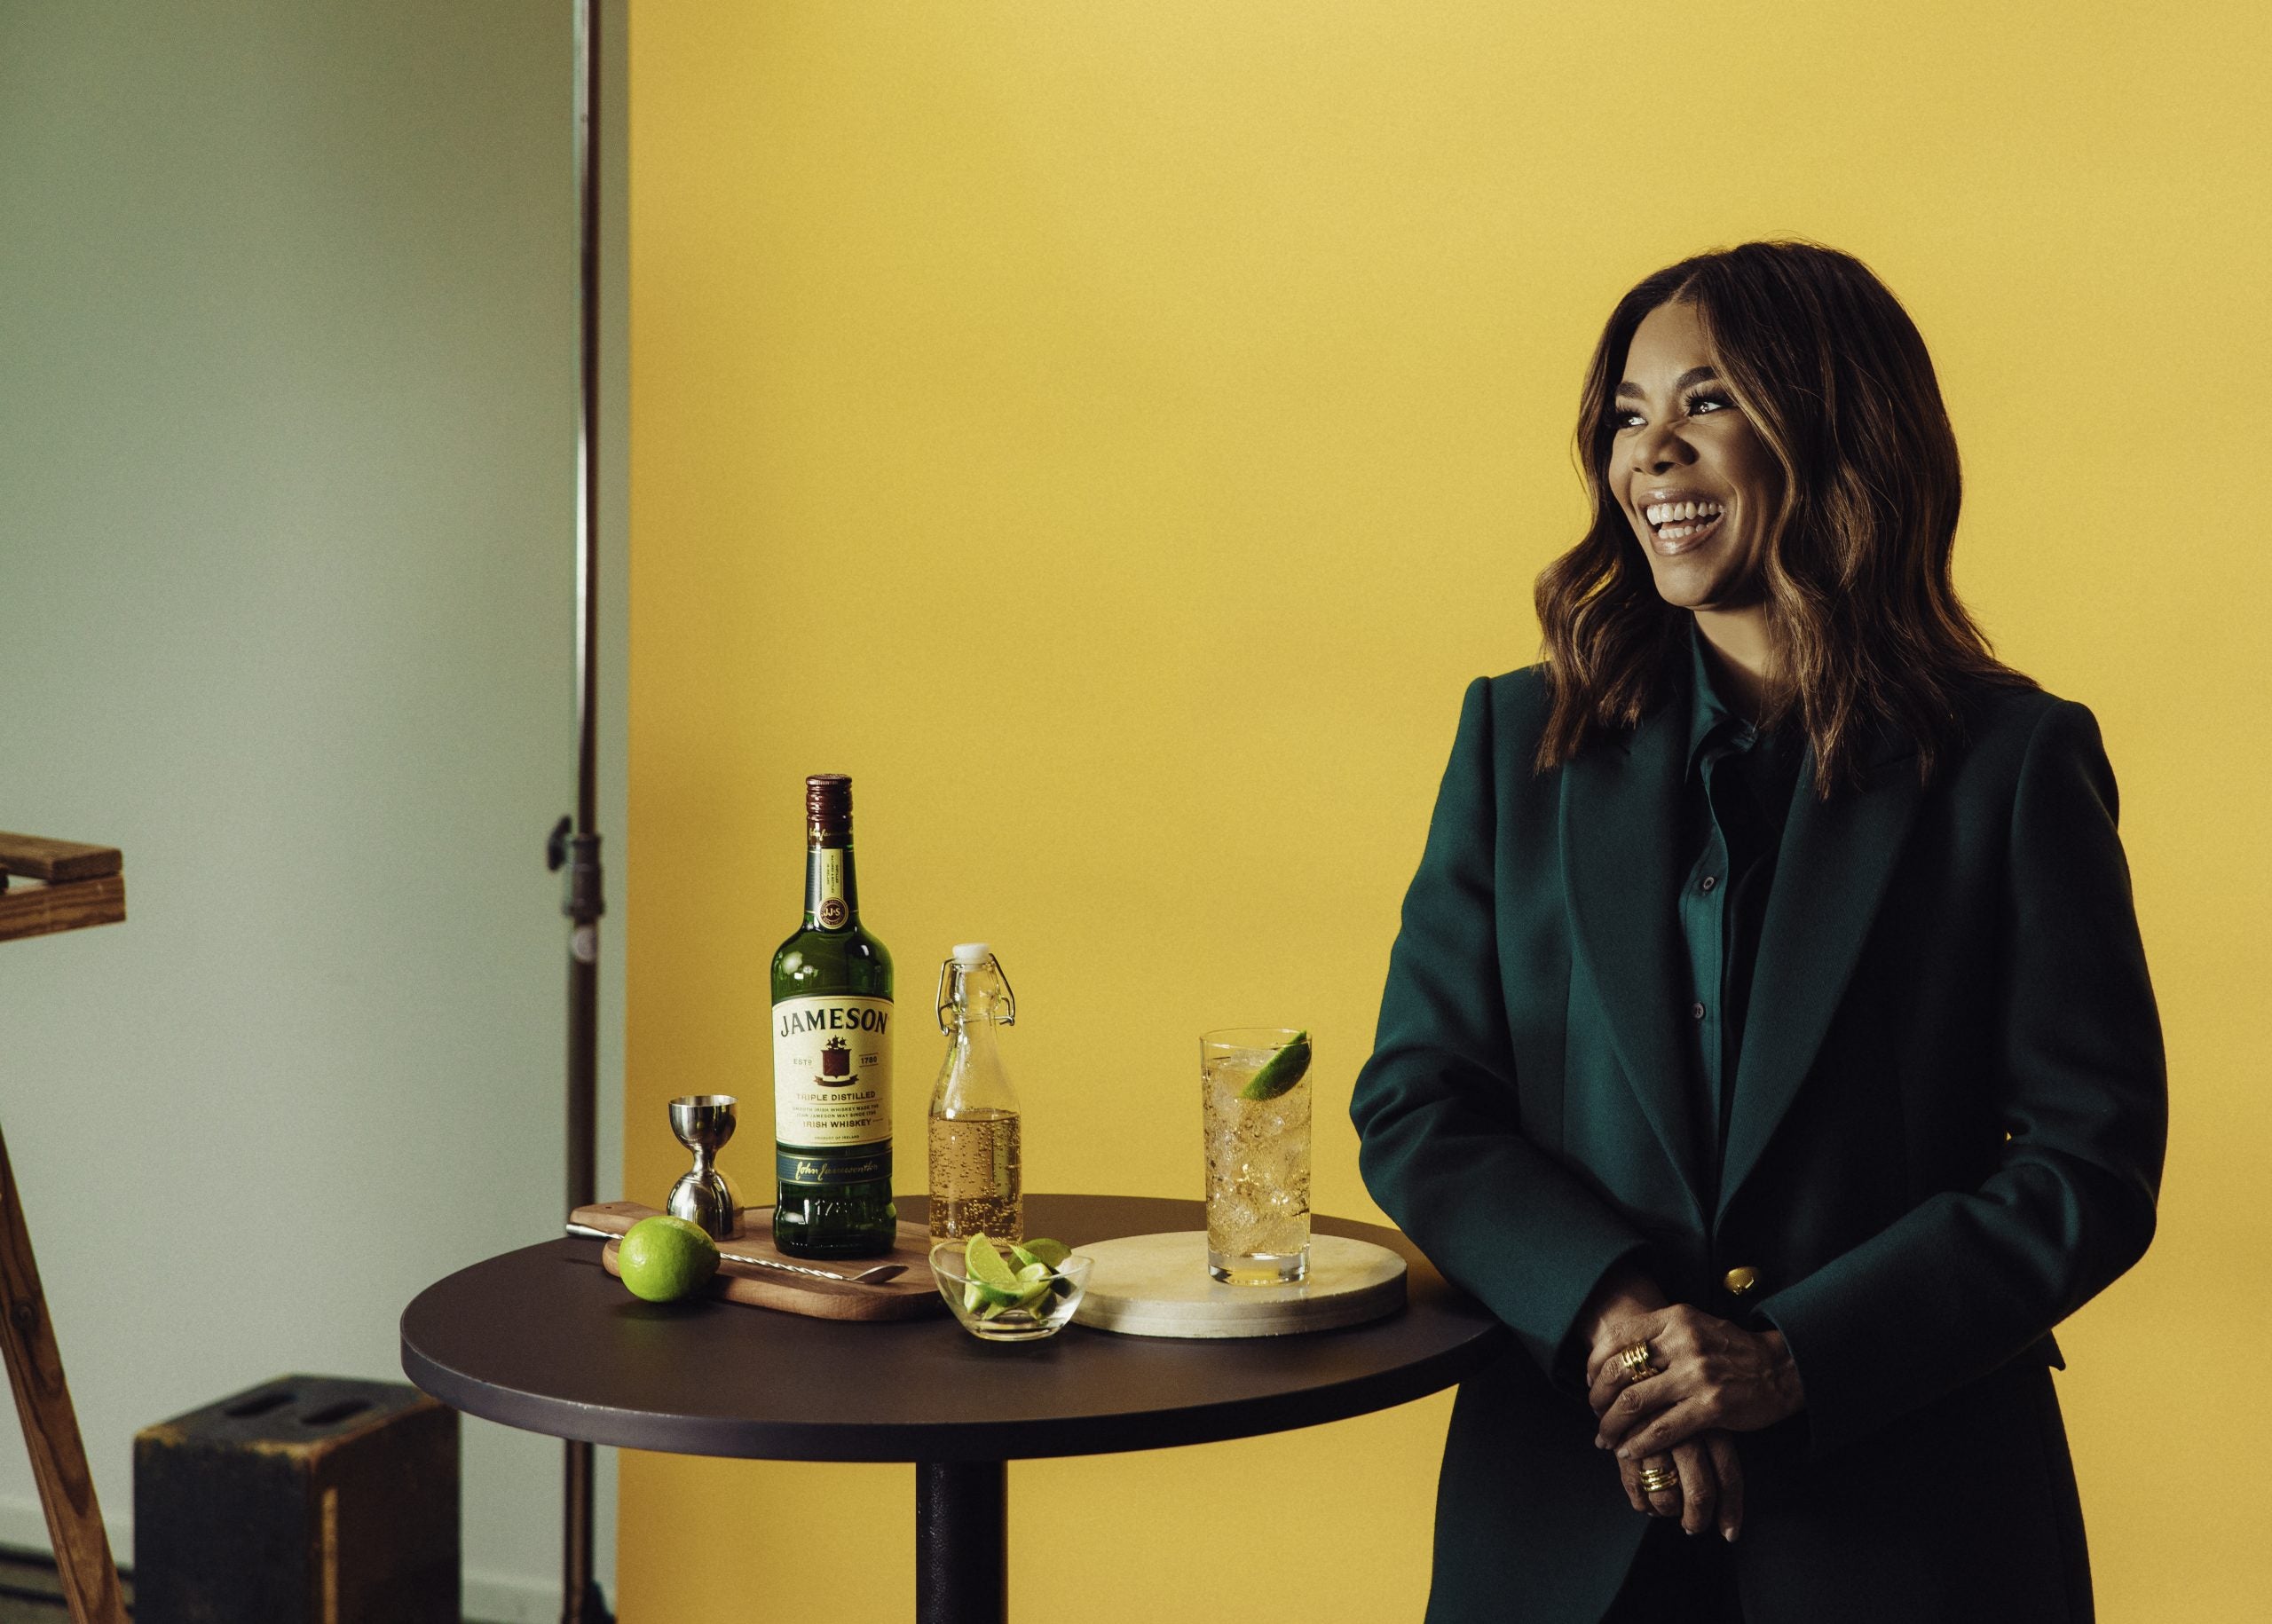 Regina Hall Talks Wellness, Friendship And Partnering With Jameson Whiskey For St. Patrick's Day